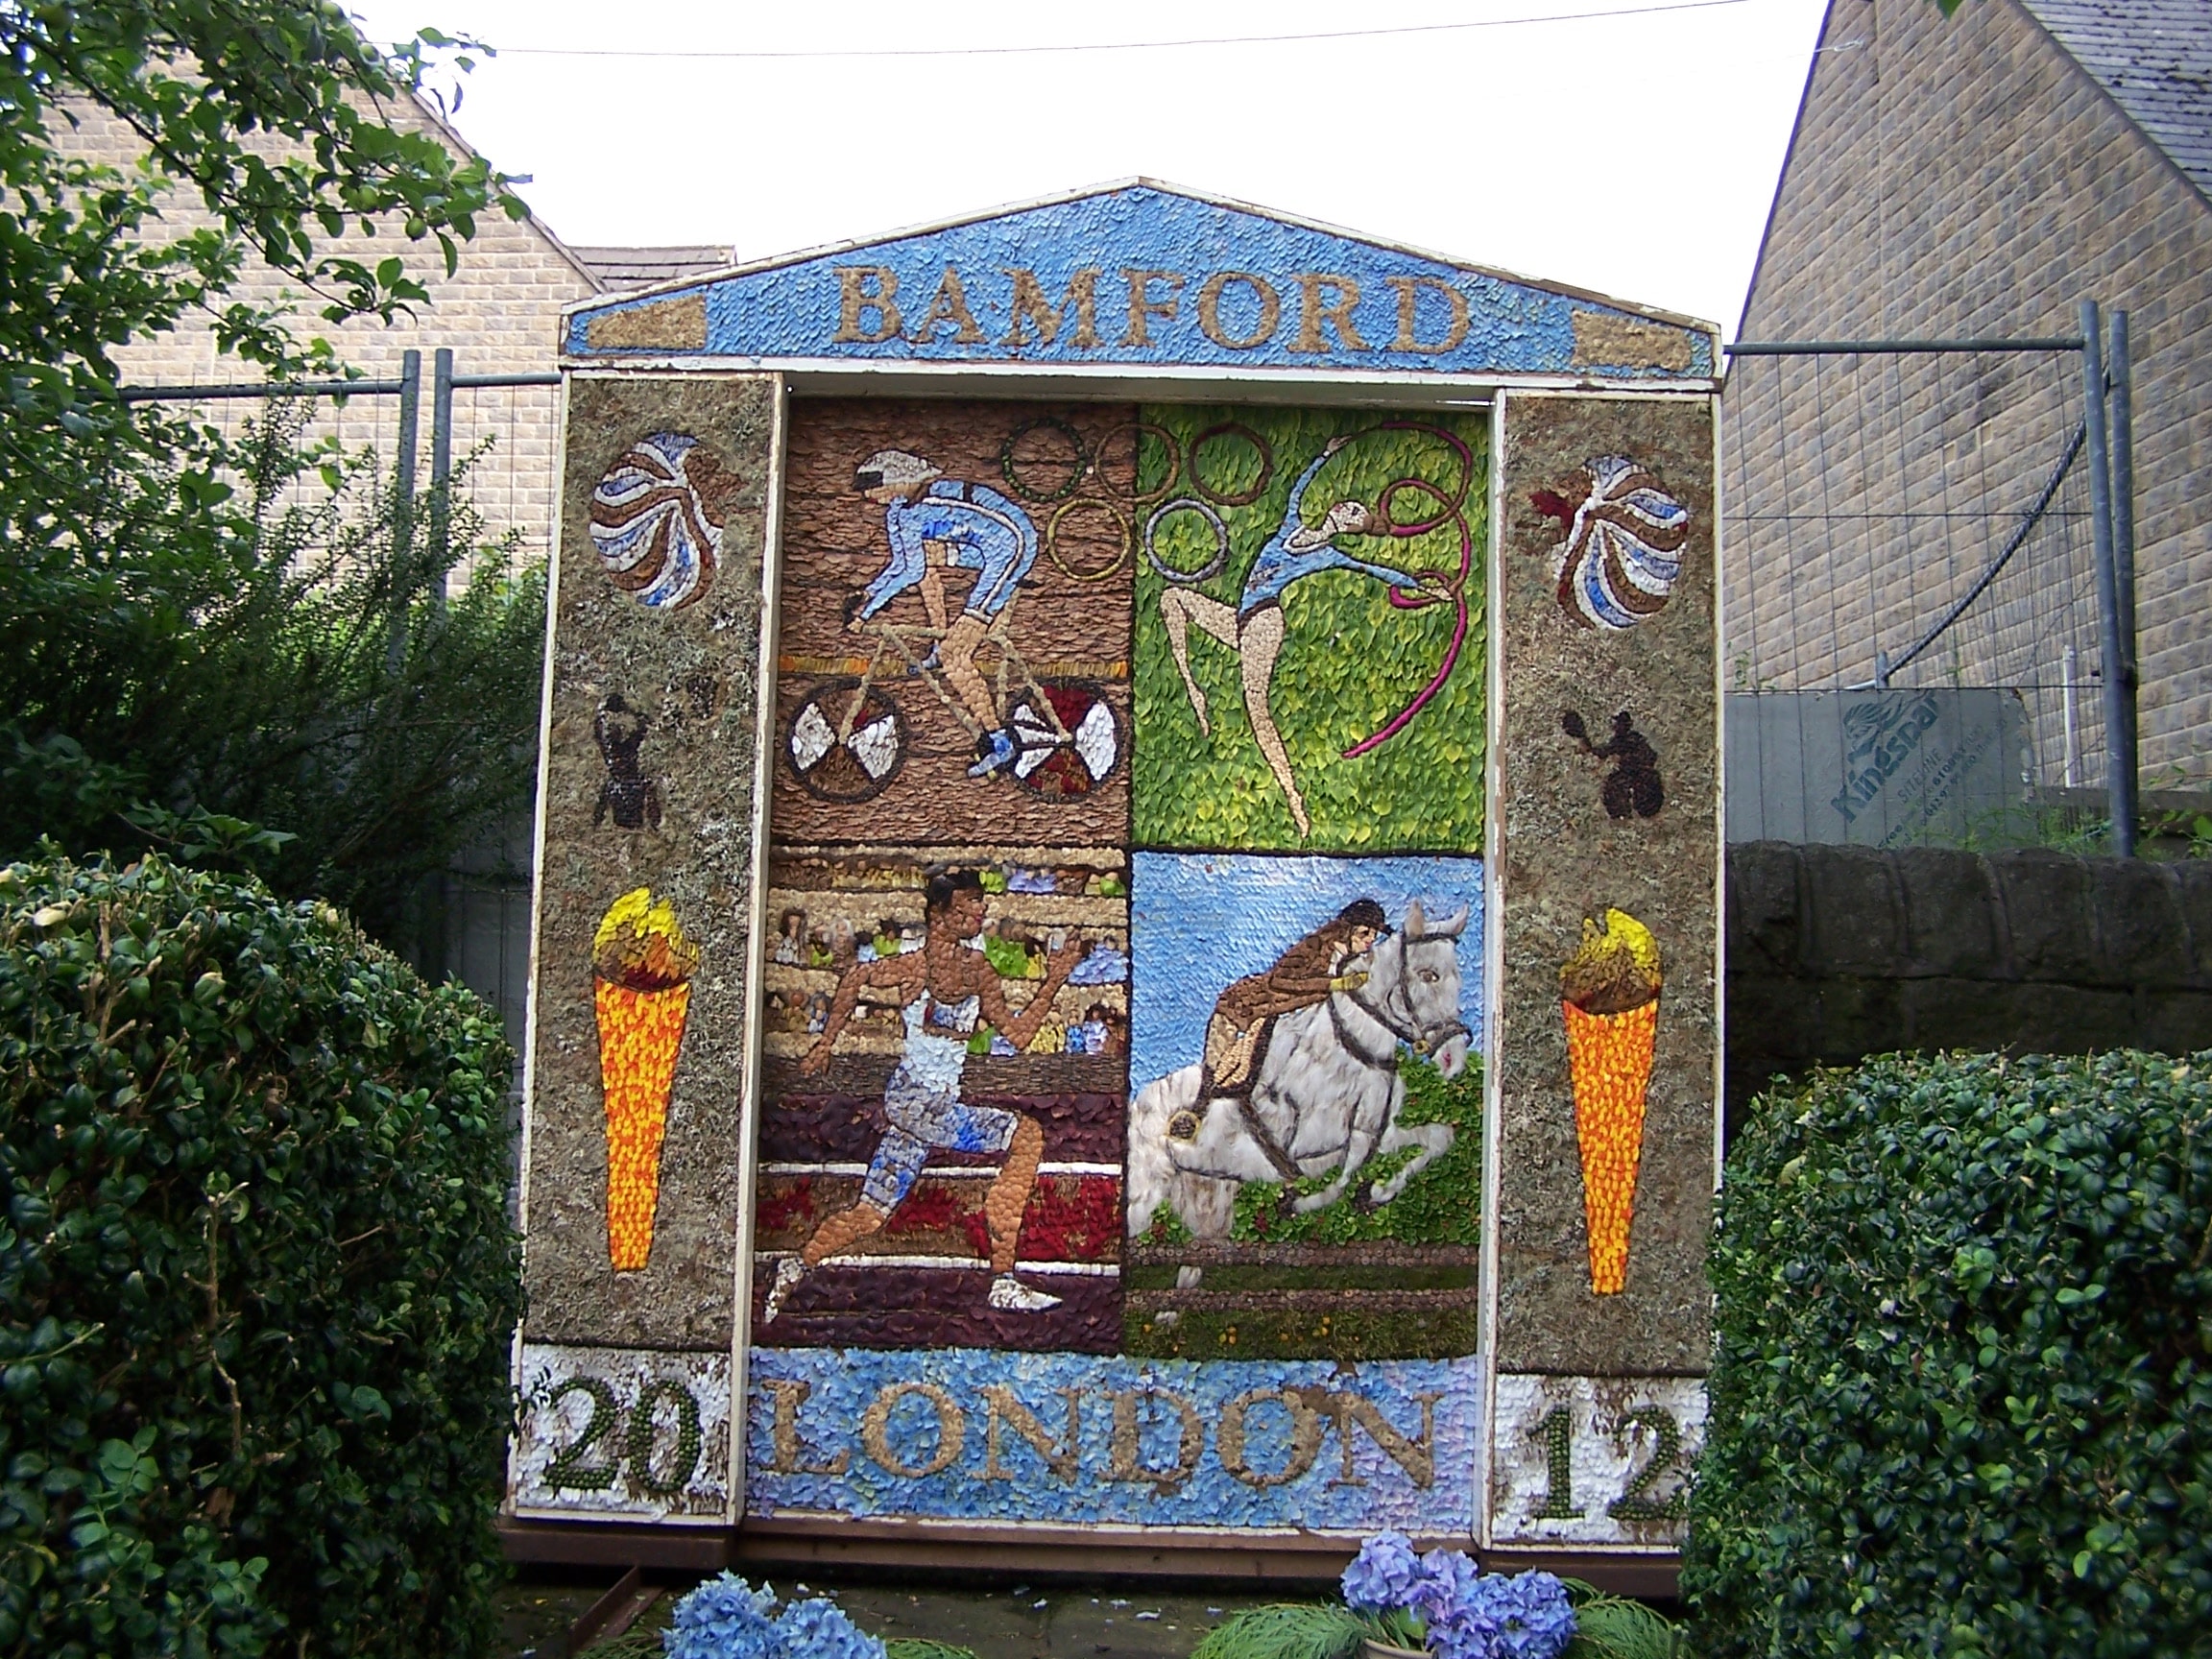 The 2012 Well Dressing